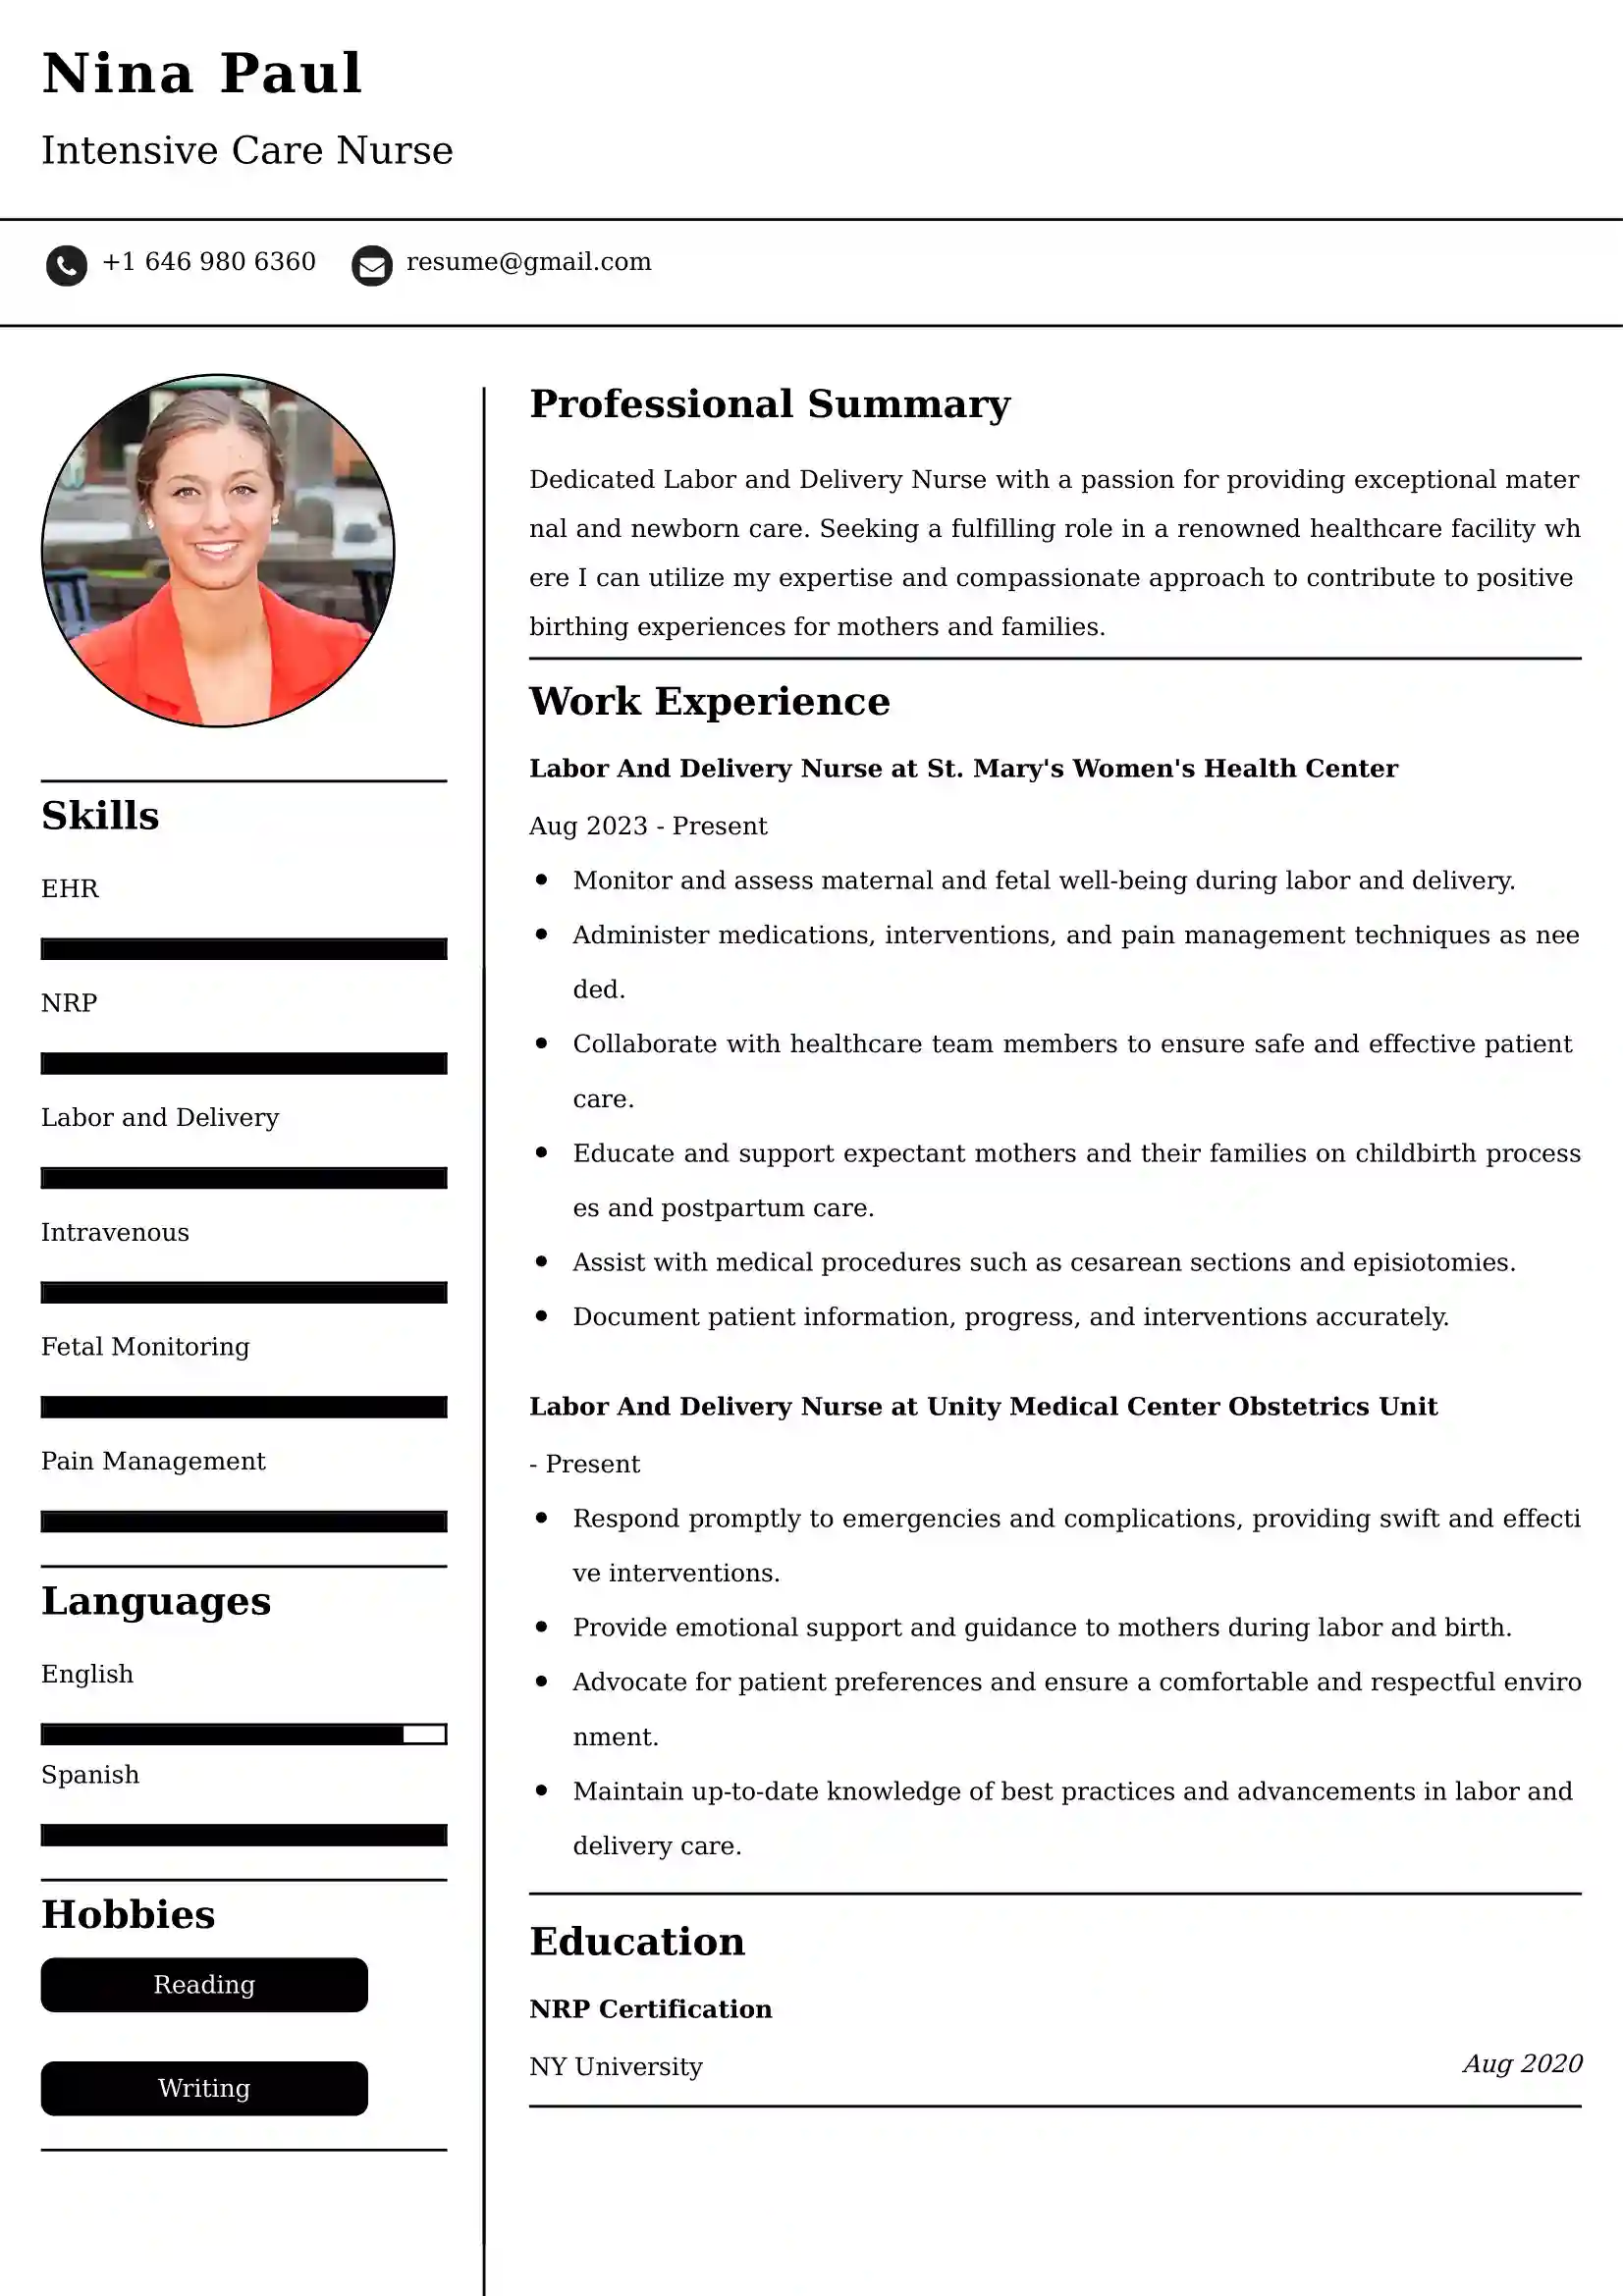 Labor And Delivery Nurse Resume Examples - Brazilian Format, Latest Template